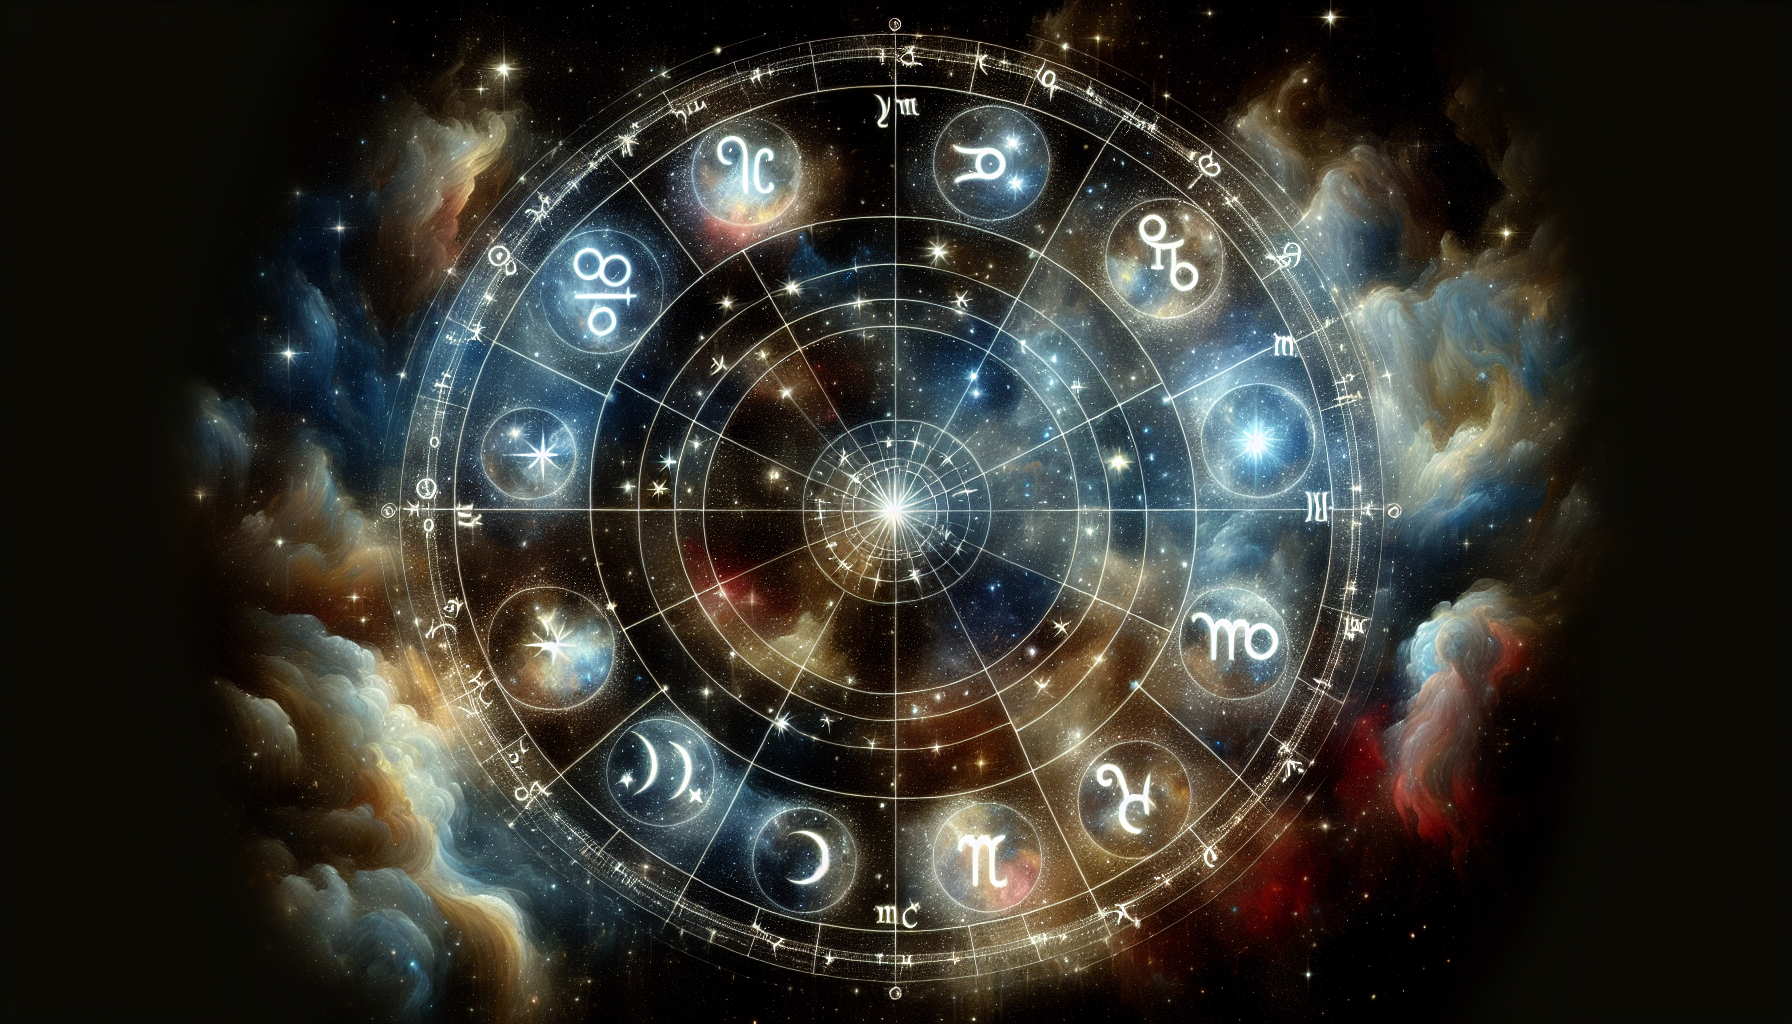 How Do I Read My Astrological Birth Chart?